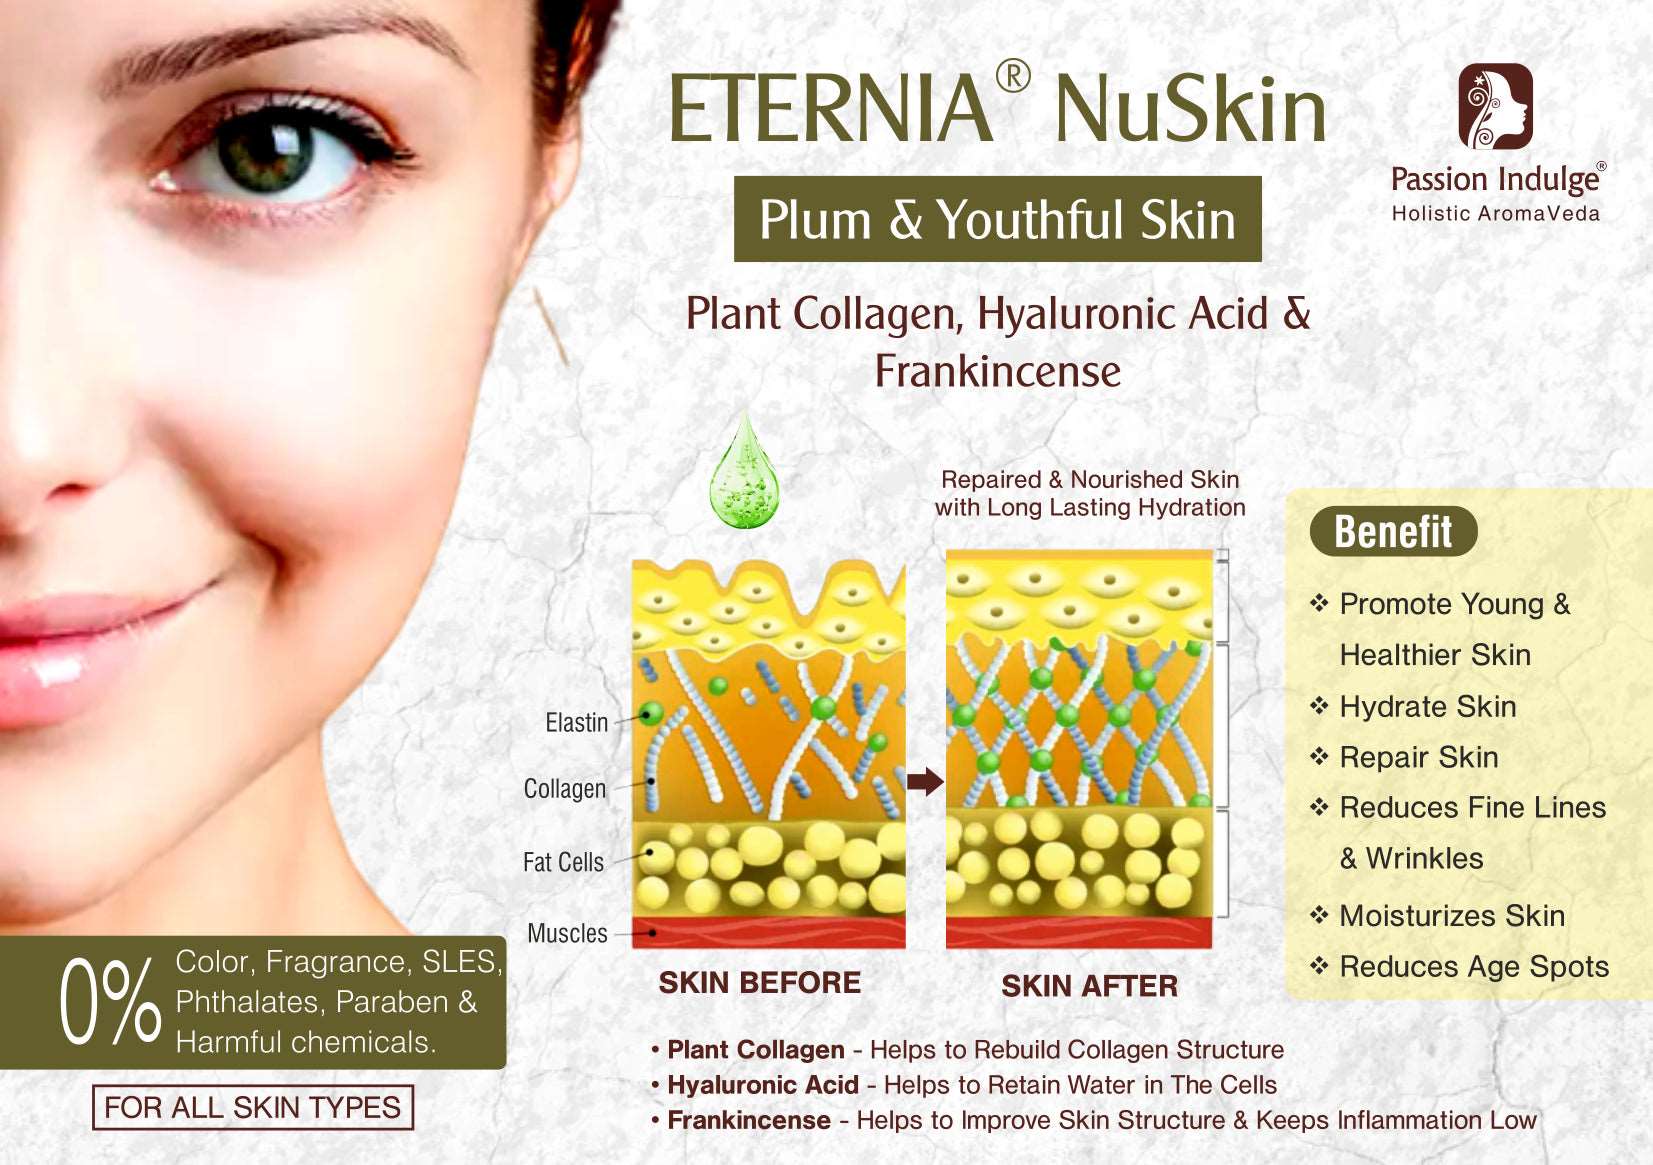 Eternia NuSkin Face Mudd 200gm For Youthful Skin, Anti-Aging | Anti-Wrinkle | Reduces Fine Lines & Wrinkles | Skin Hydration & Nourishes | Healthy Skin With Plant Collagen, Hyaluronic Acid & Frankincense | Natural